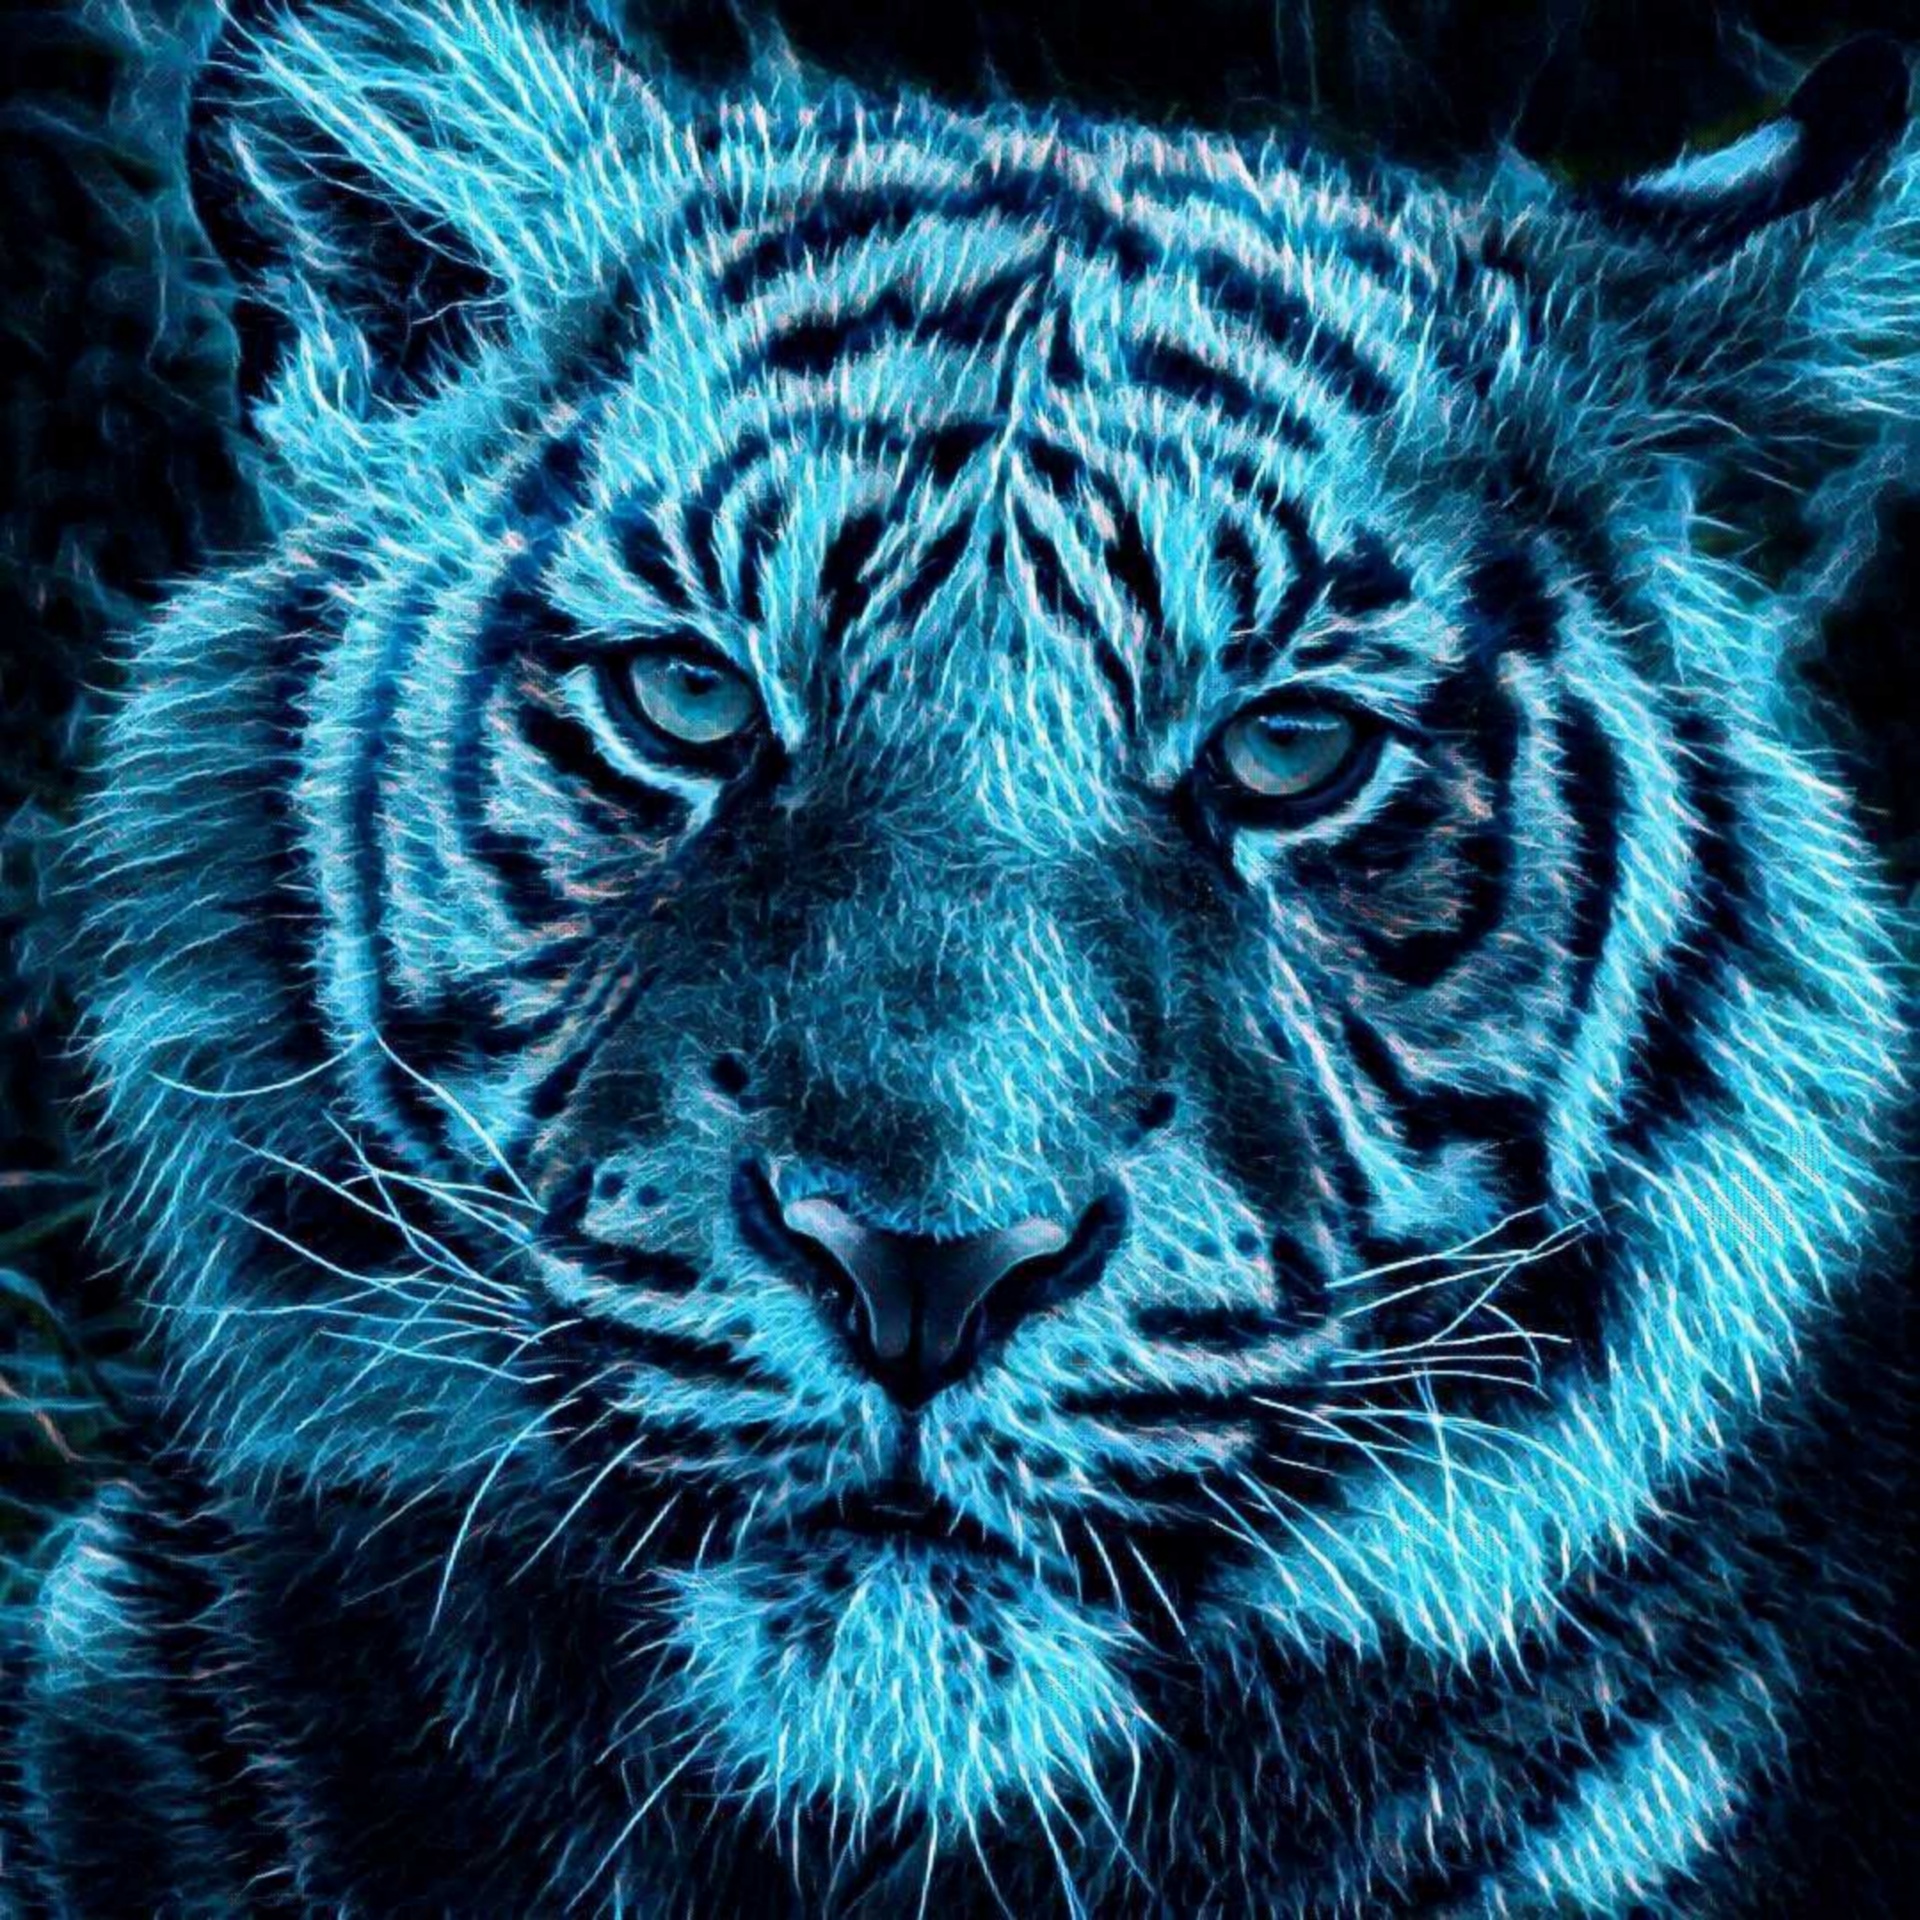 drawing of a tiger in blue flames